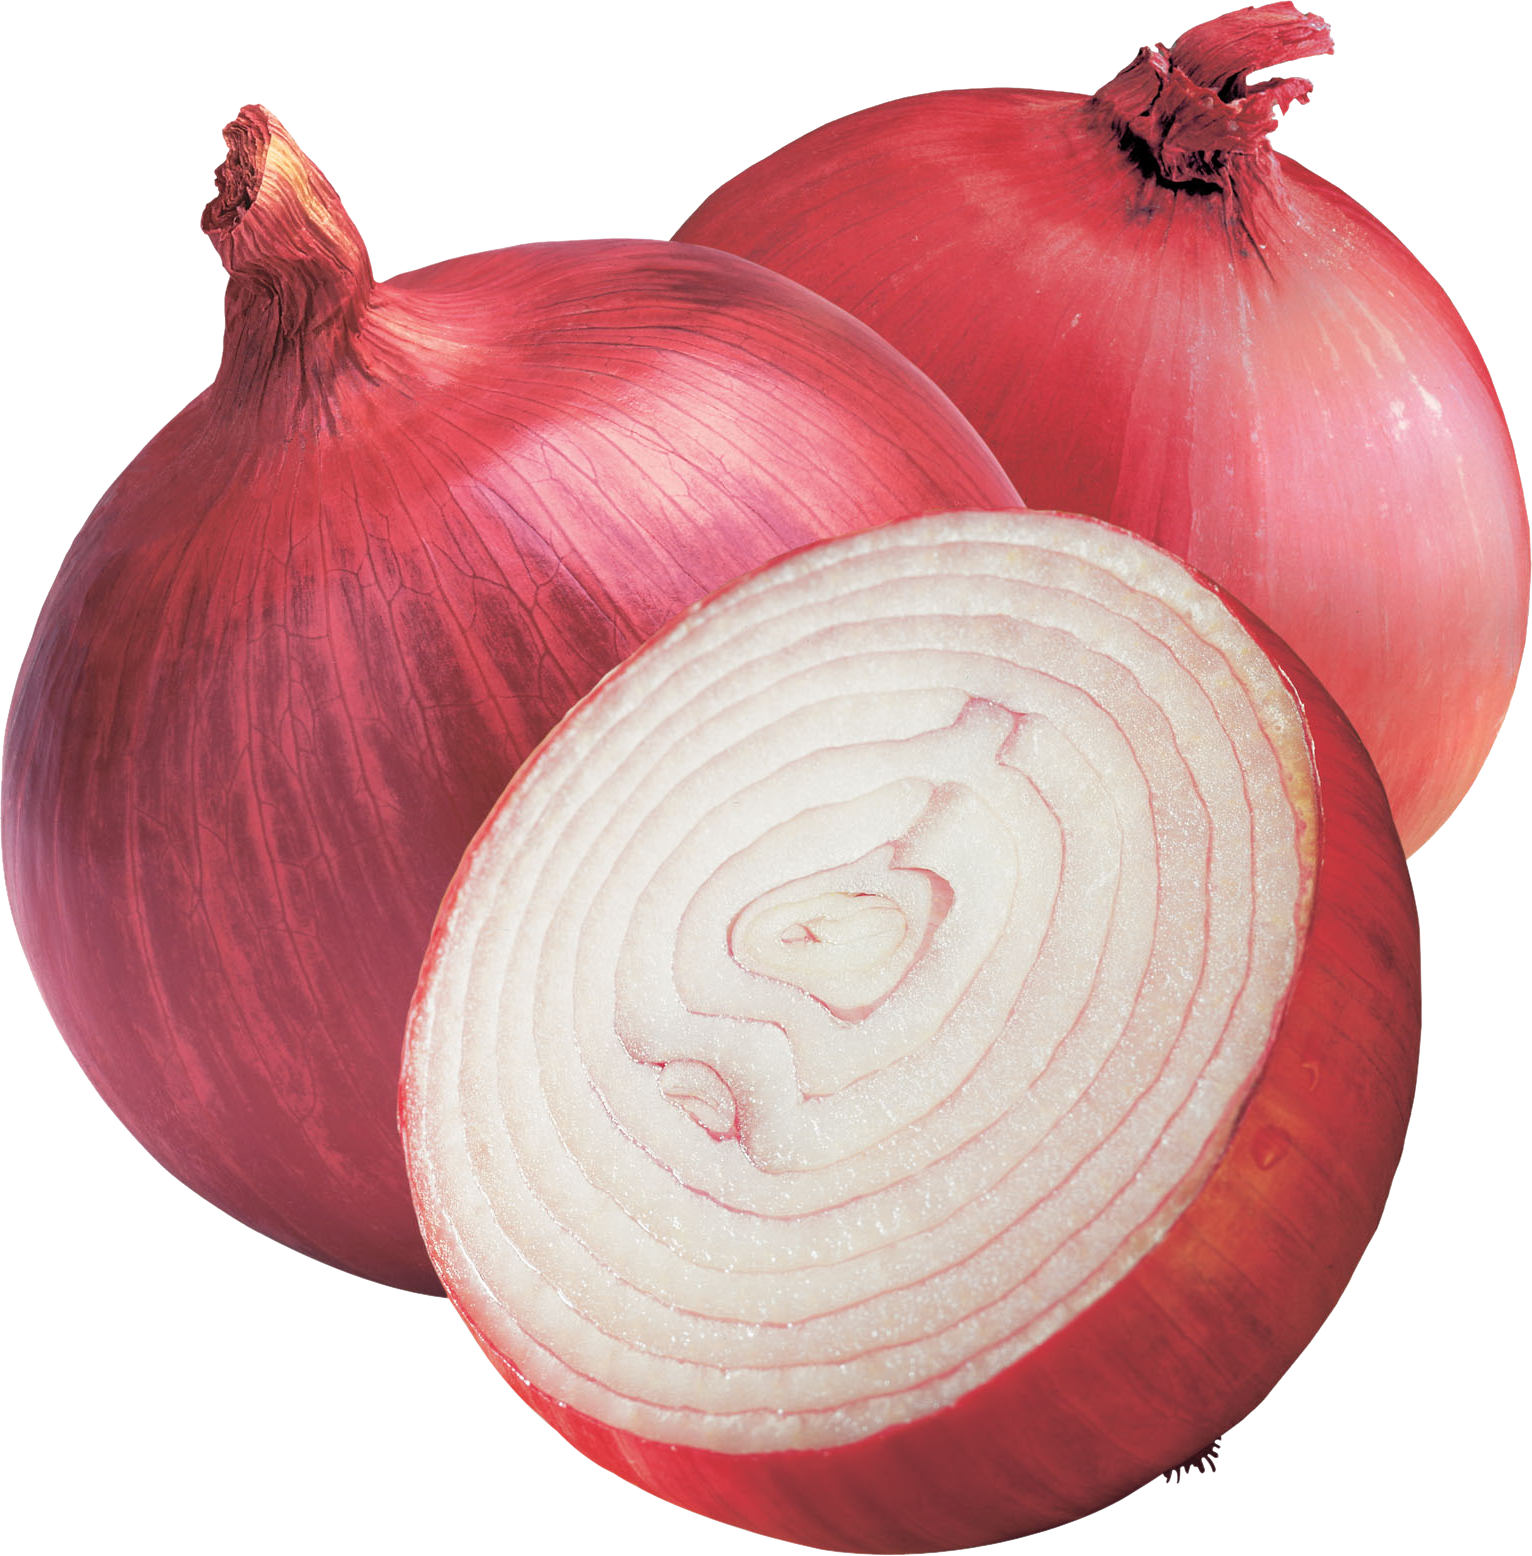 Onion Png Image - Transparent Background Onion Png Clipart (1532x1556), Png Download